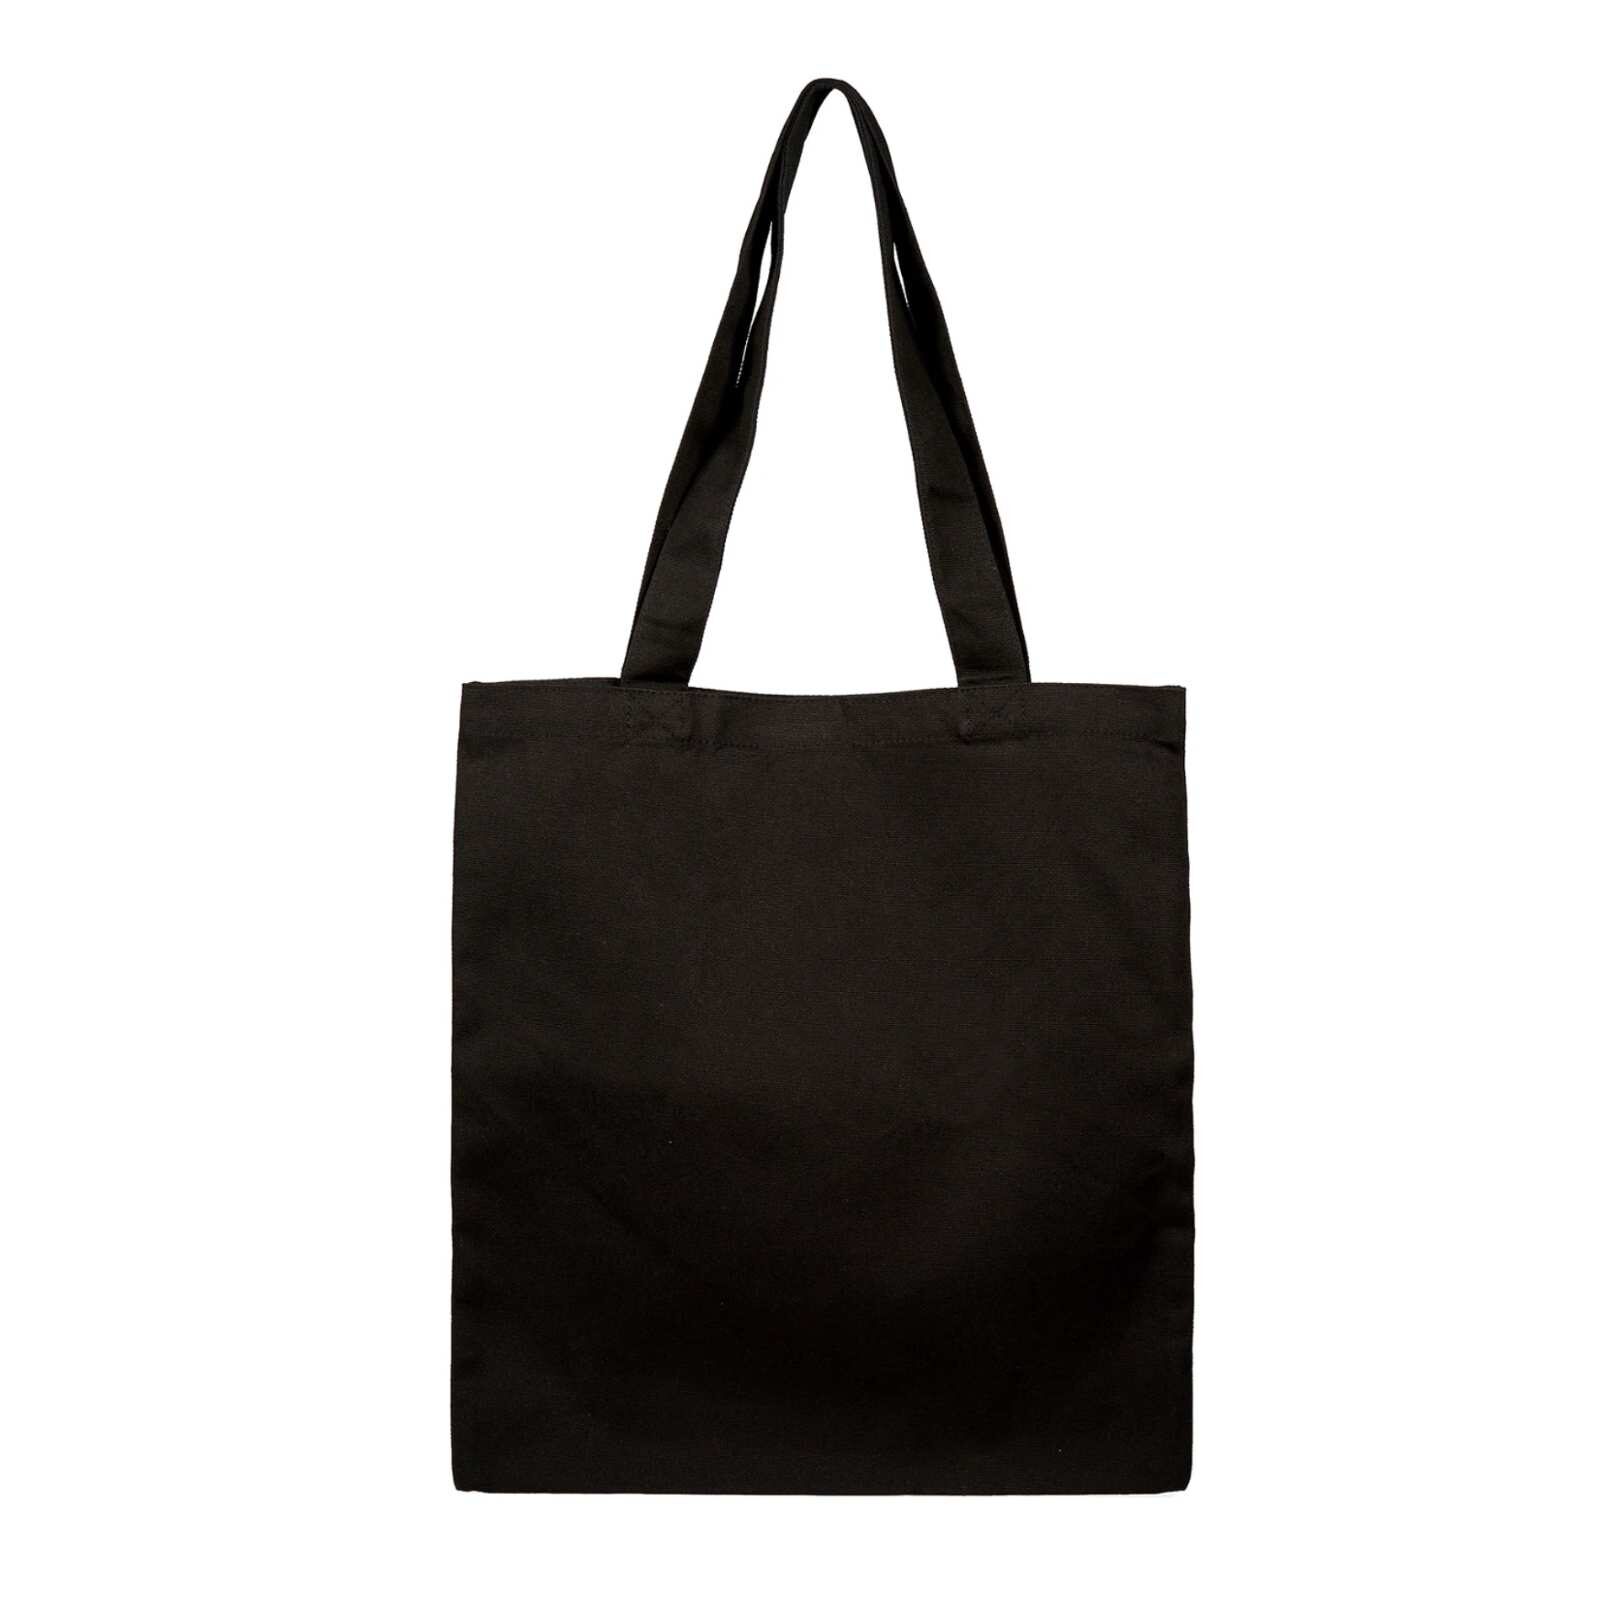 custom tote bags by contain